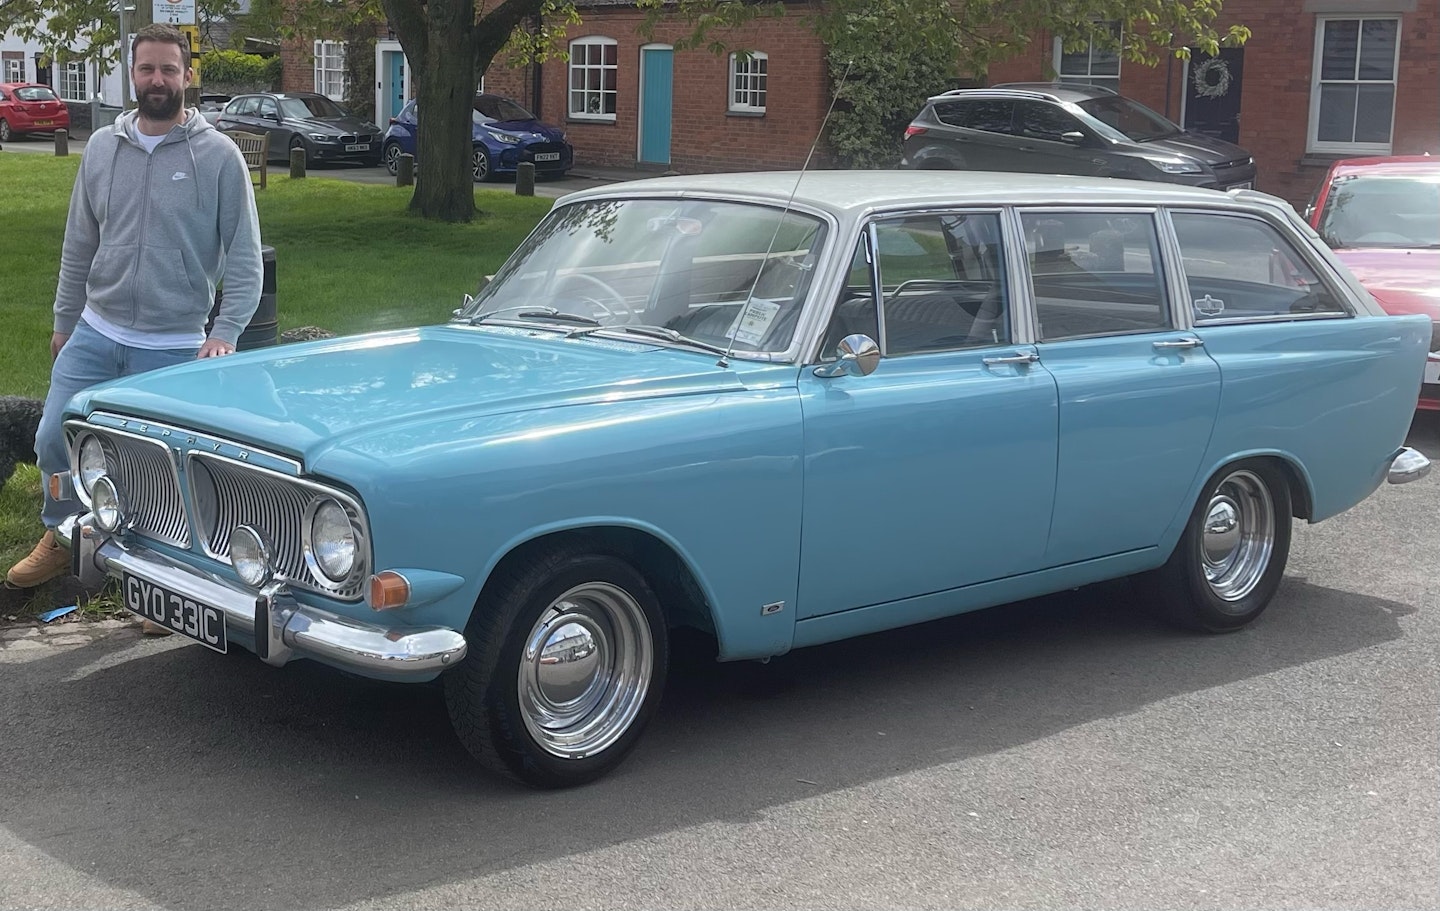 Jack Roberts enjoyed Drive-It Day in this 1965 Ford Zephyr MkIII Estate.